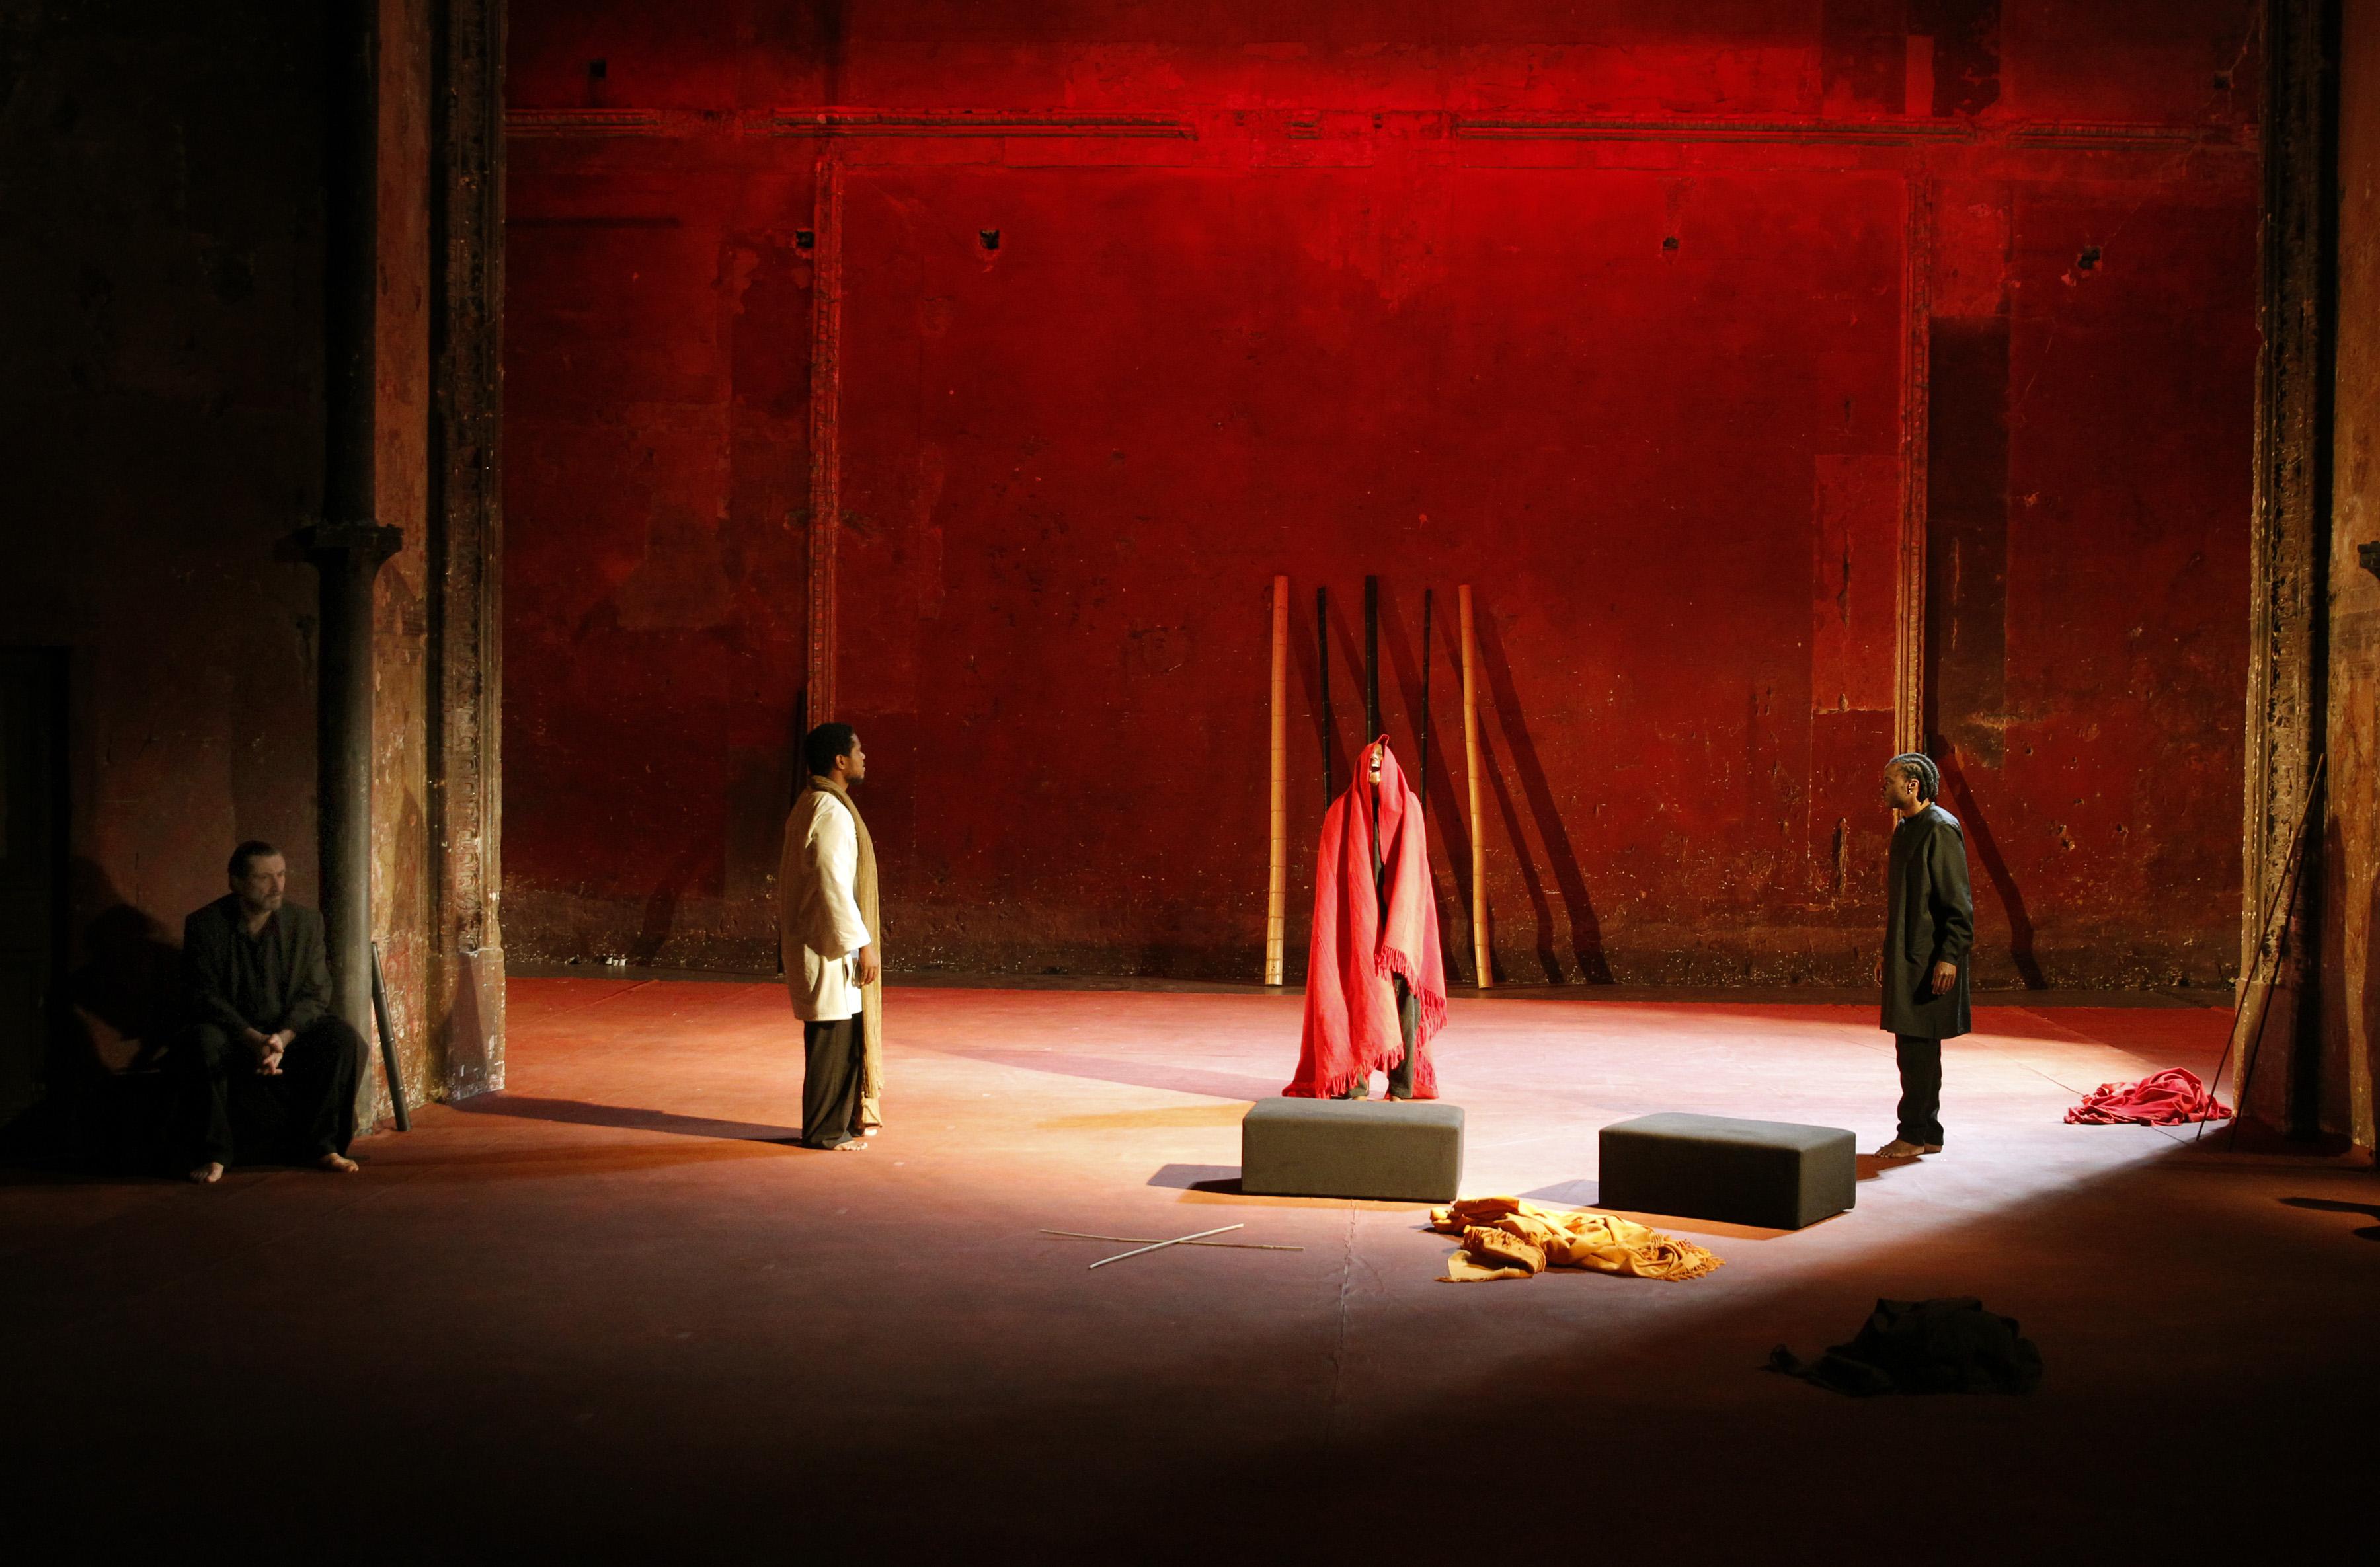 Four performers are spread out on a stage with a red backdrop. Three people stand under a bright light. A fourth figure sits in shadow at the left.